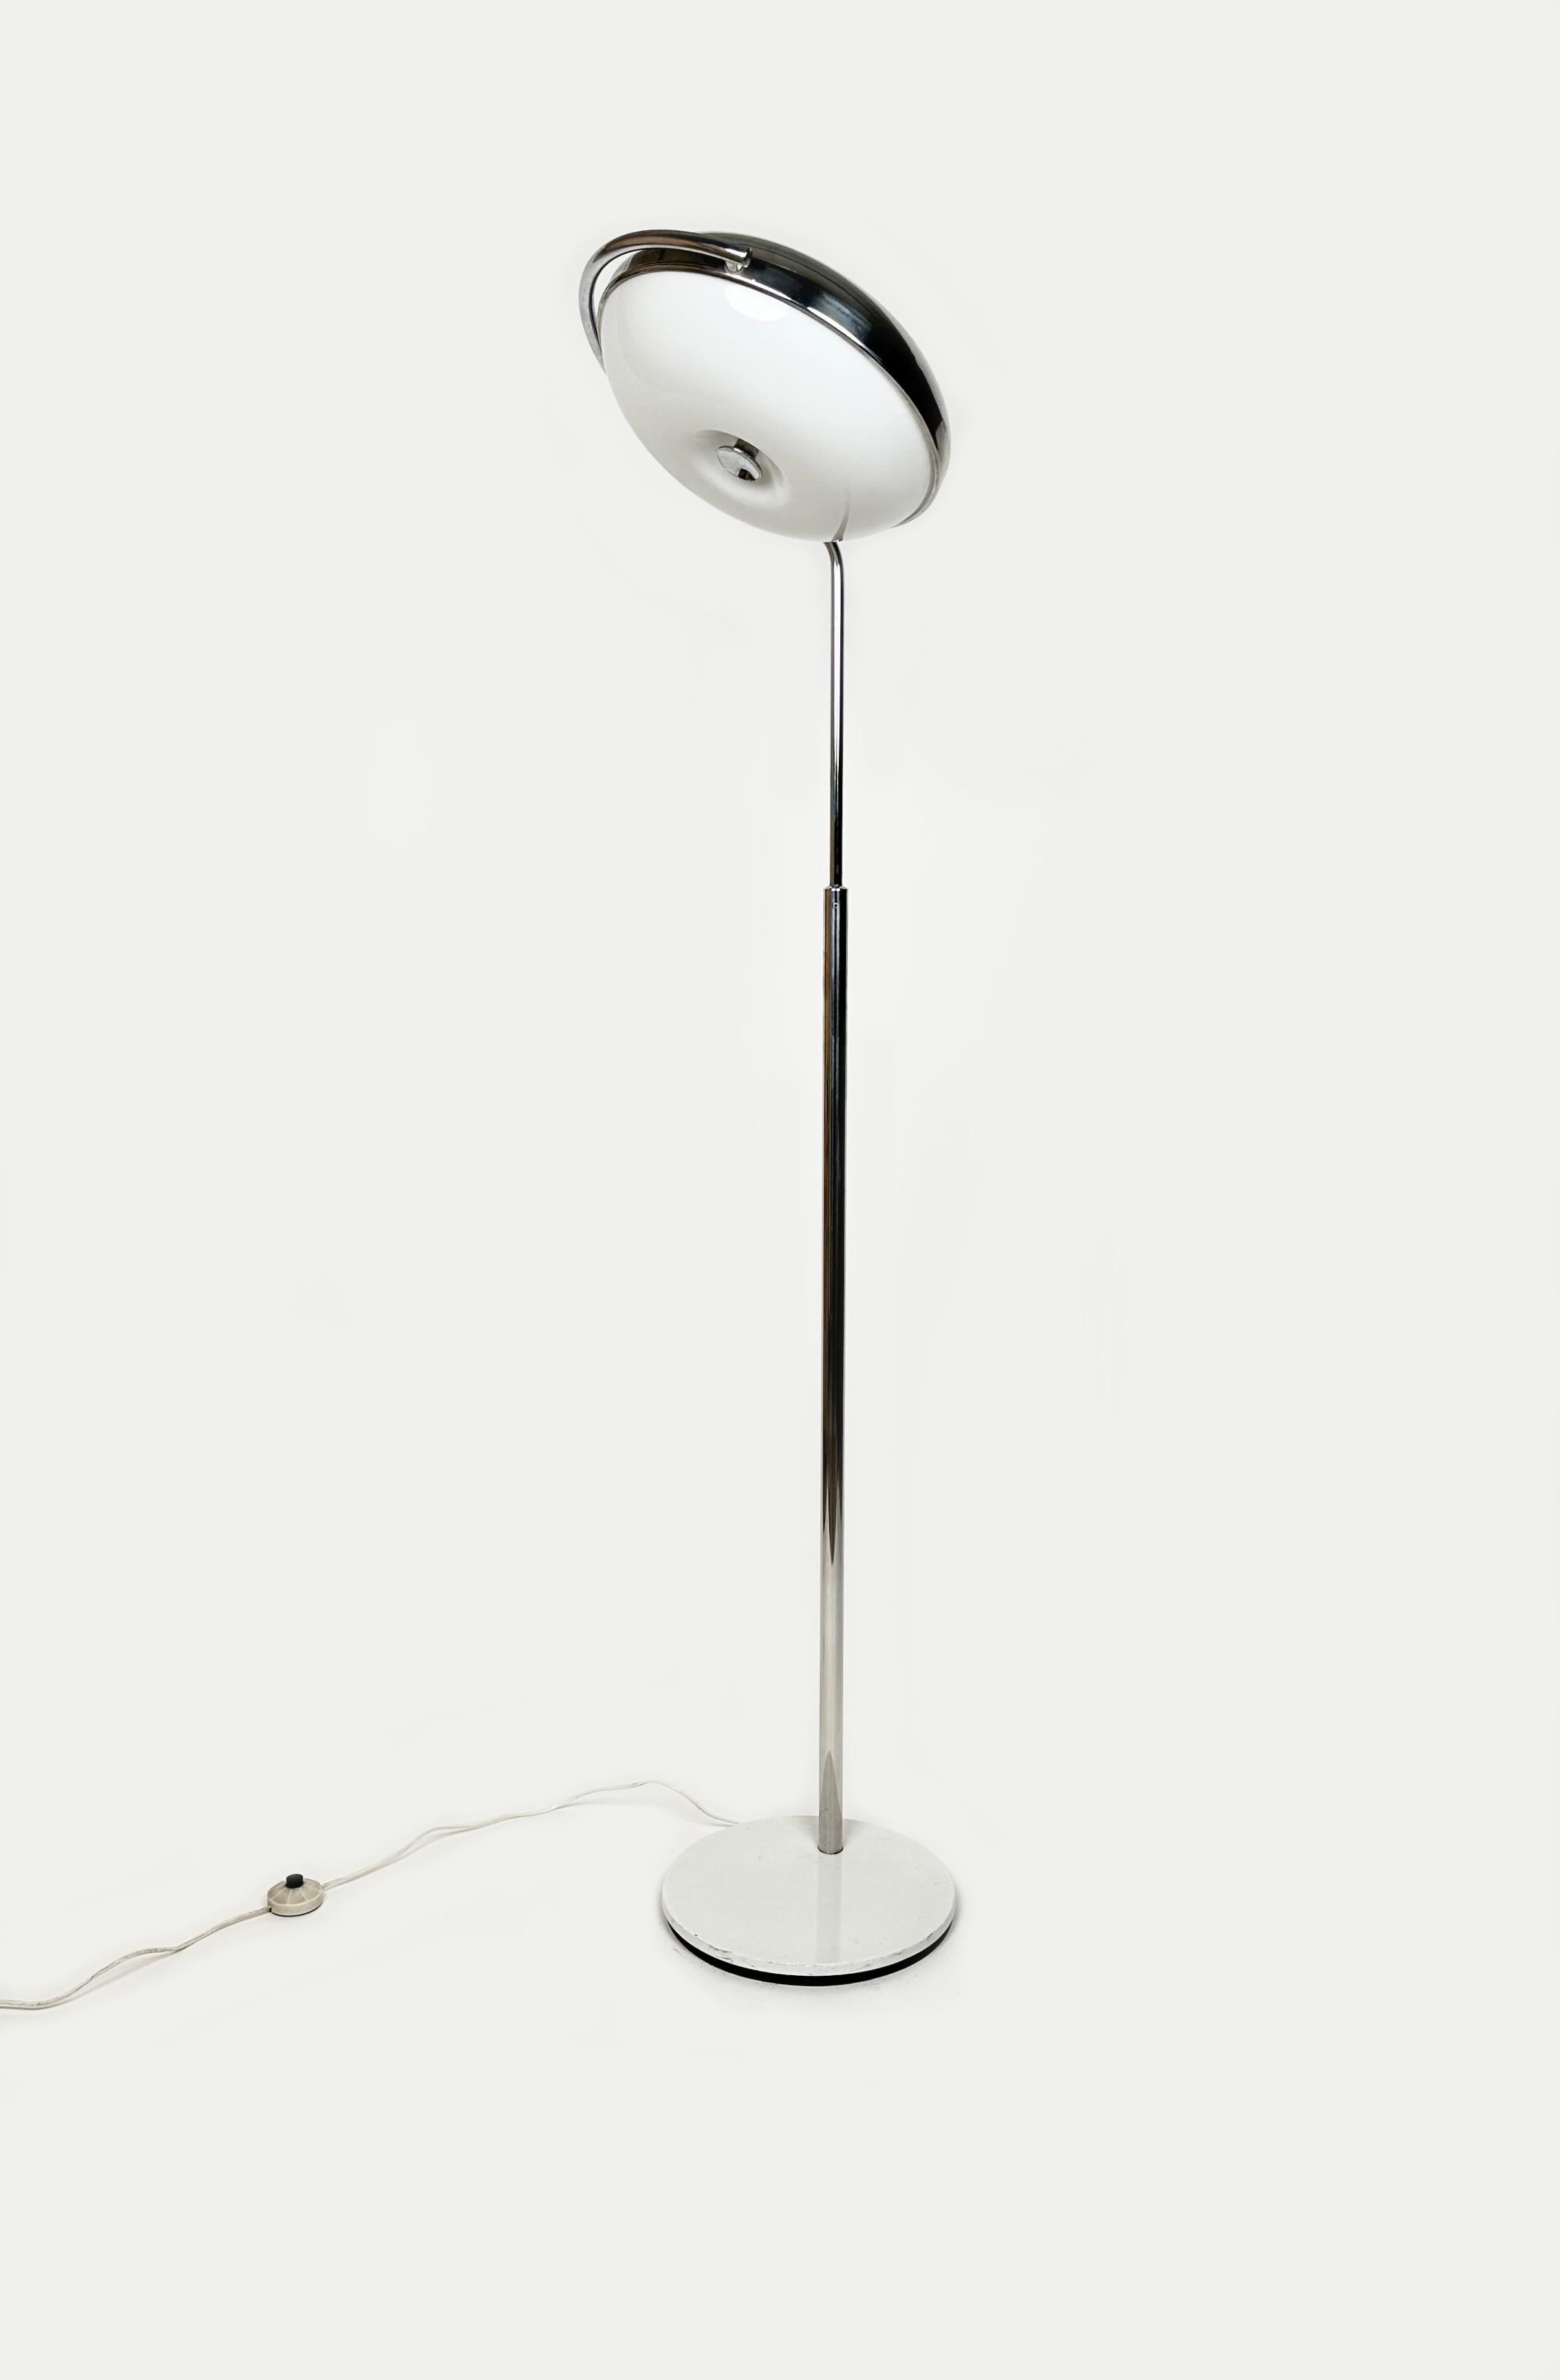 Late 20th Century Midcentury Adjustable Floor Lamp in Chrome & Plexiglass by Reggiani, Italy 1970s For Sale